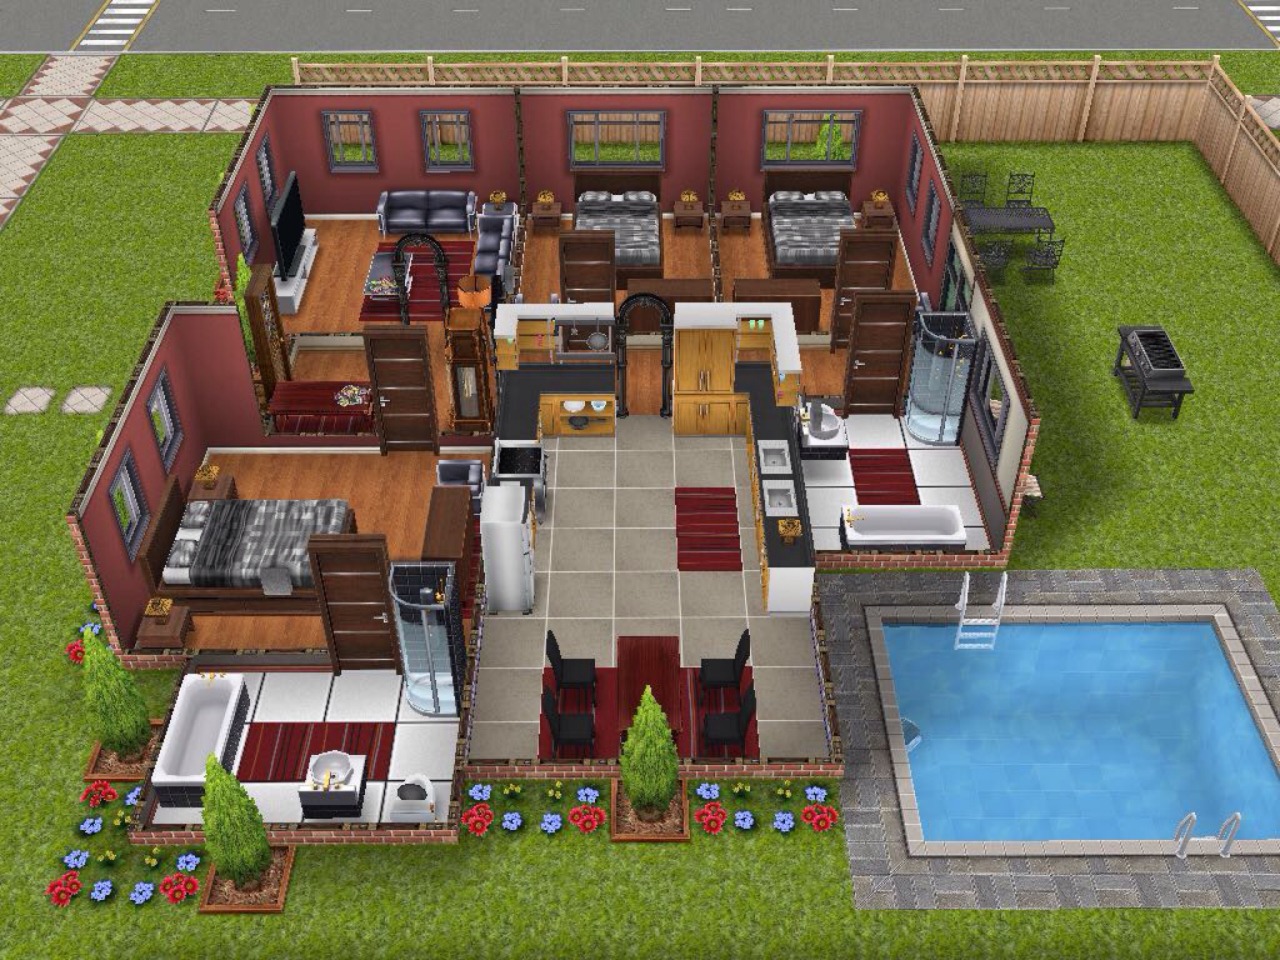 Sims Freeplay Original Designs — This is a requested one story house design. It...